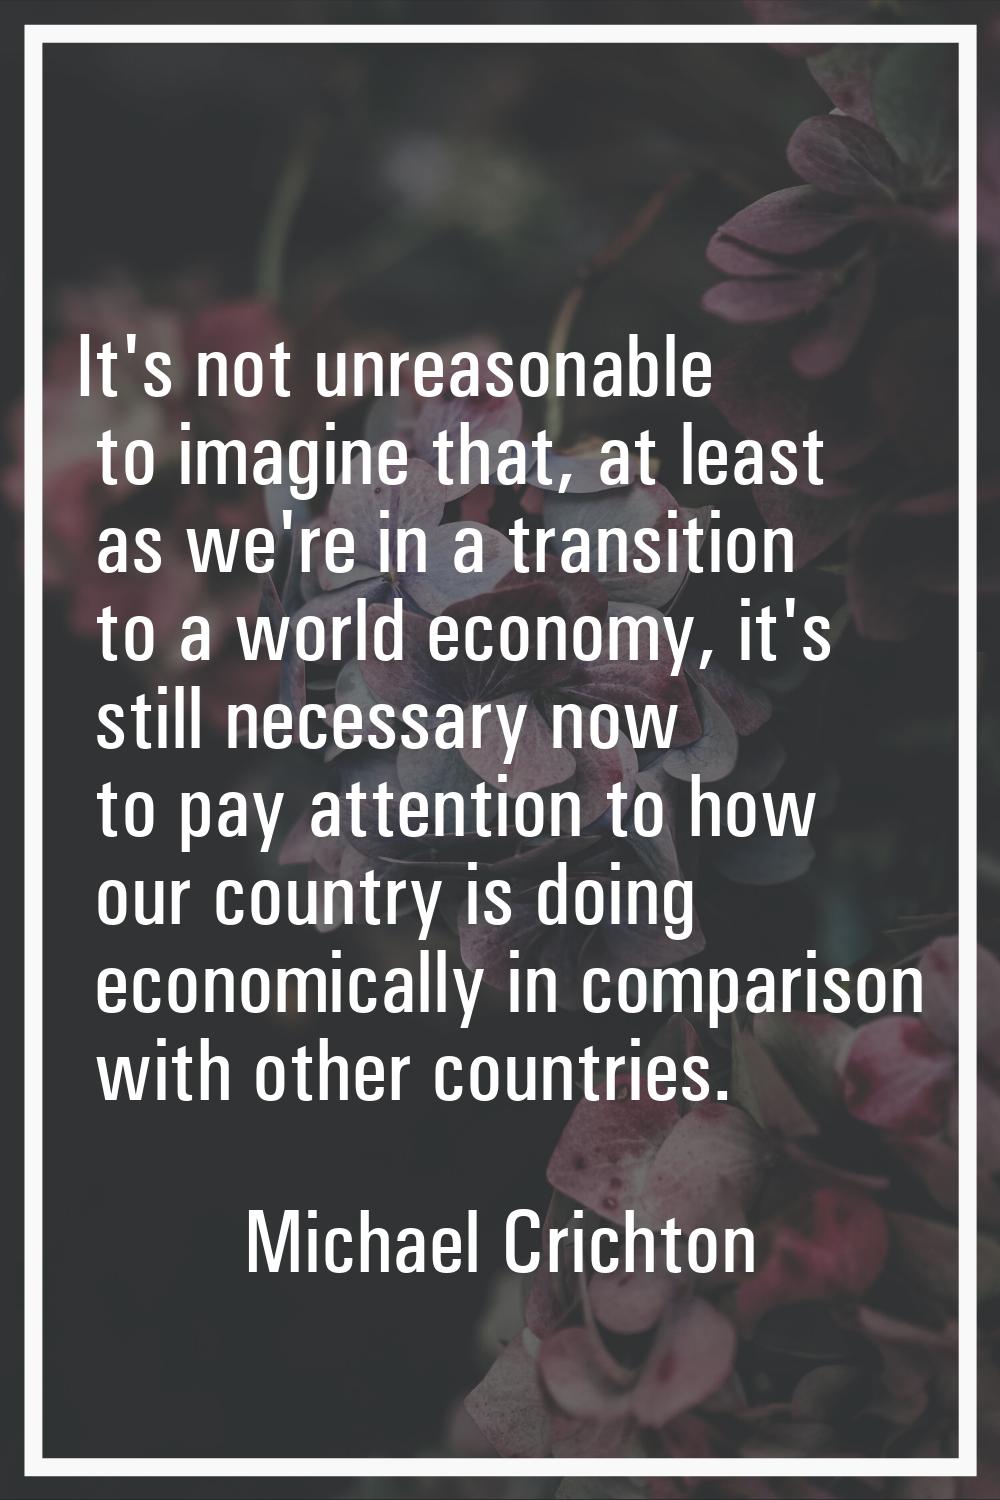 It's not unreasonable to imagine that, at least as we're in a transition to a world economy, it's s